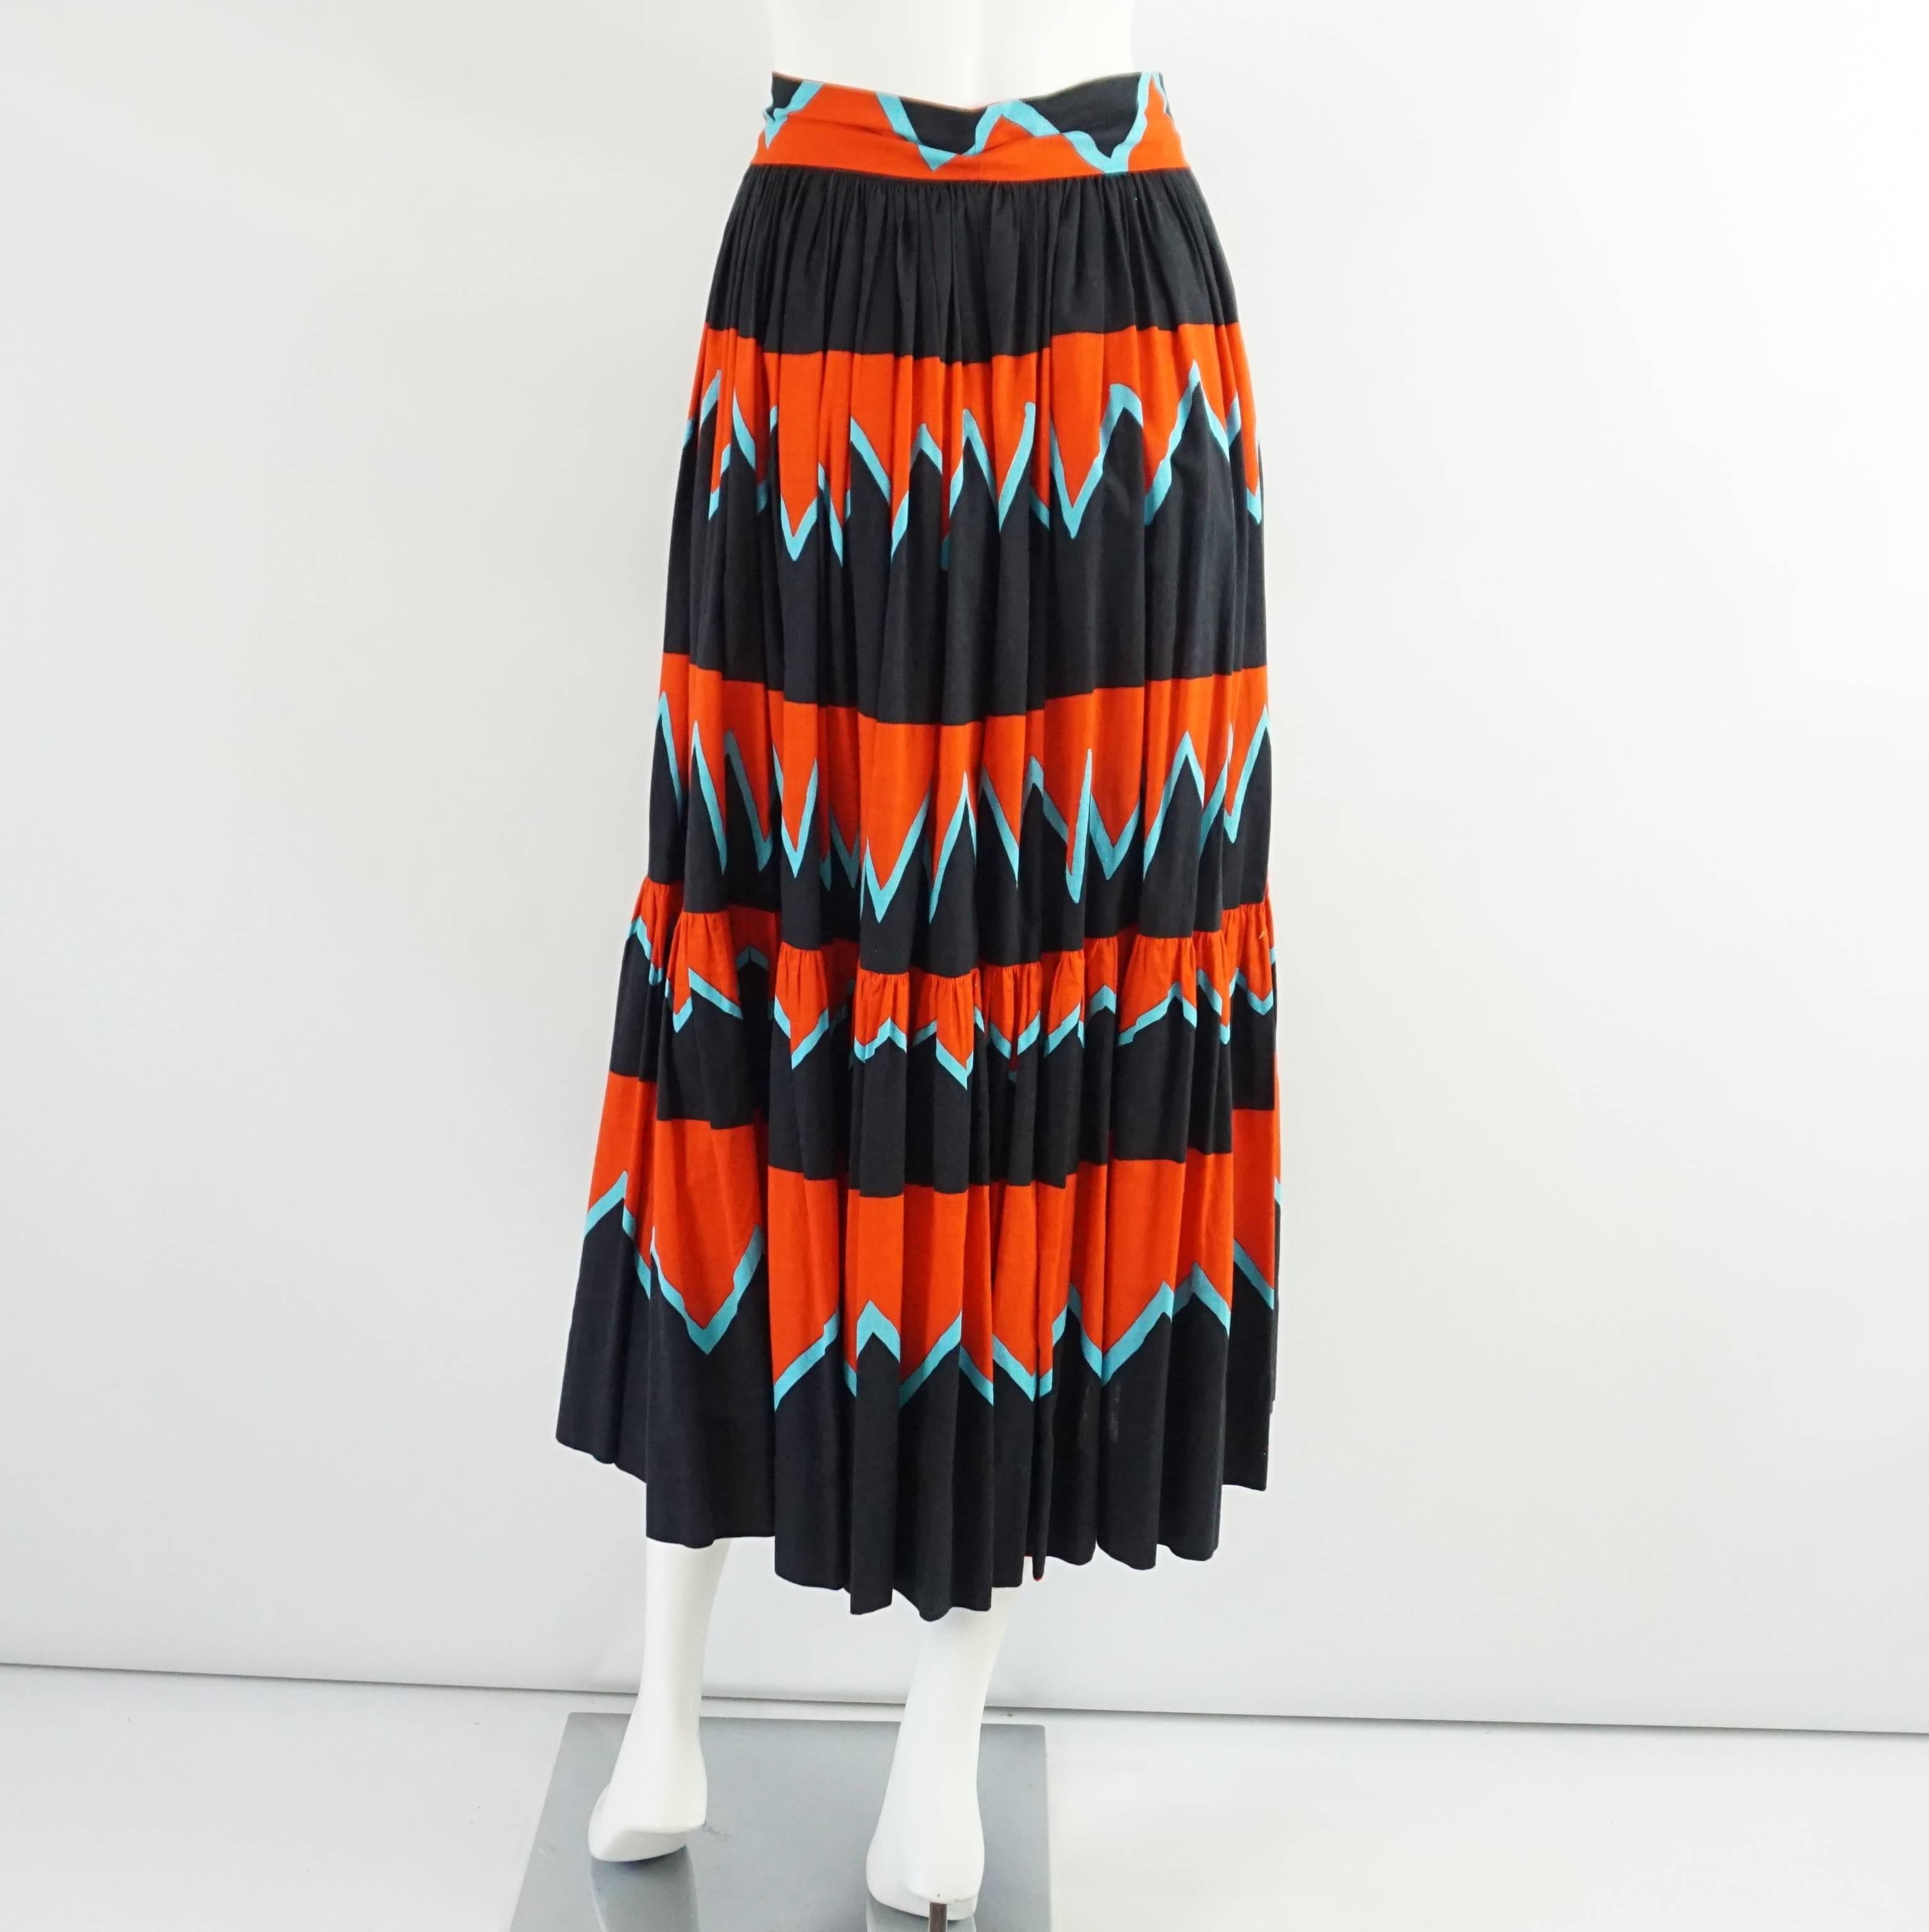 Yves Saint Laurent Vintage Black and Red Chevron Cotton Skirt - 40 -Circa 1970/s In Excellent Condition For Sale In West Palm Beach, FL